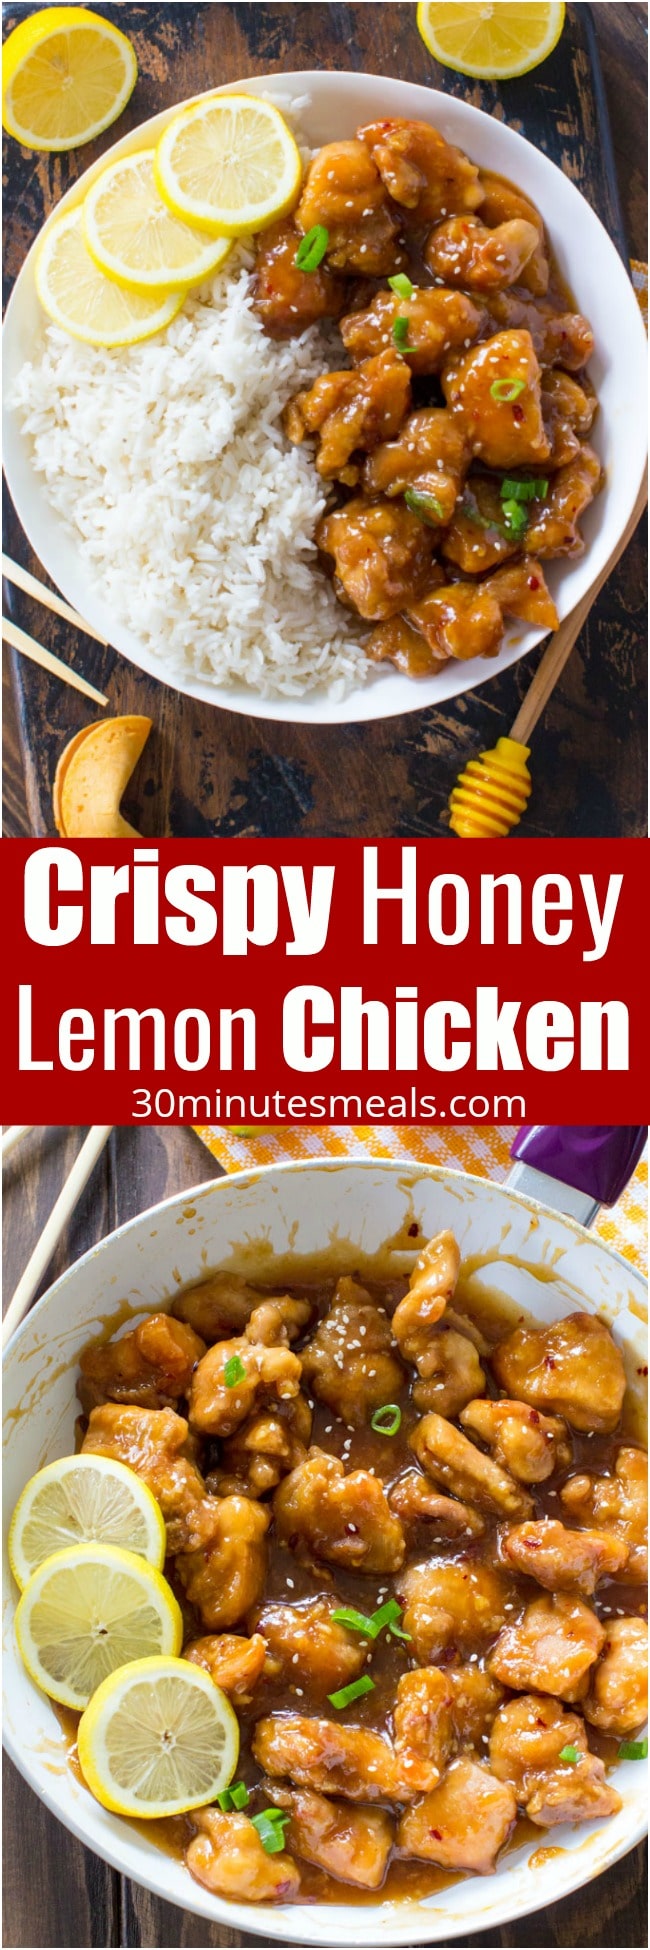 Crispy Honey Lemon Chicken is a restaurant quality meal, that can be made at home in just 30 minutes! Crispy, sticky and full of honey lemon flavor.